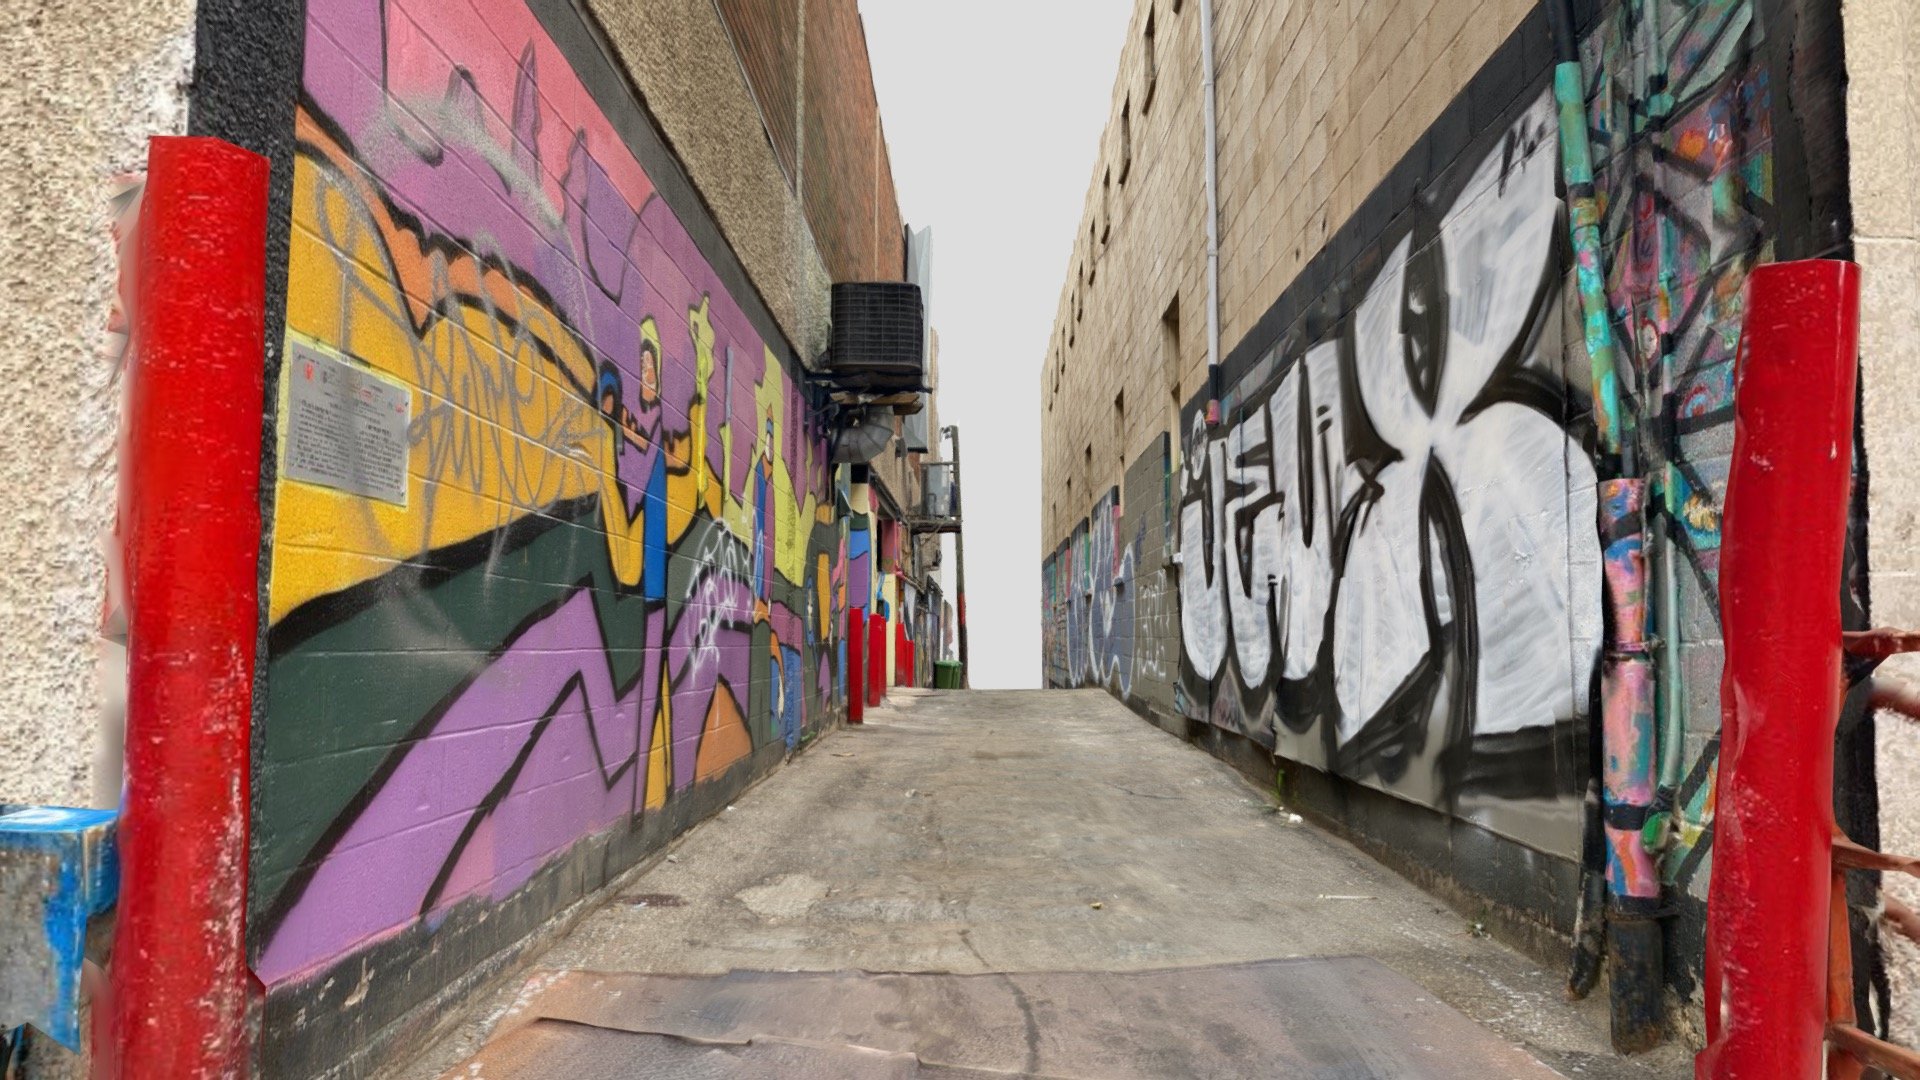 A small alleyway in Downtown Calgary's Chinatown that's covered in graffiti. Captured with several hundred photos from an iPhone 11 Pro and rendered using RealityCapture 3d model